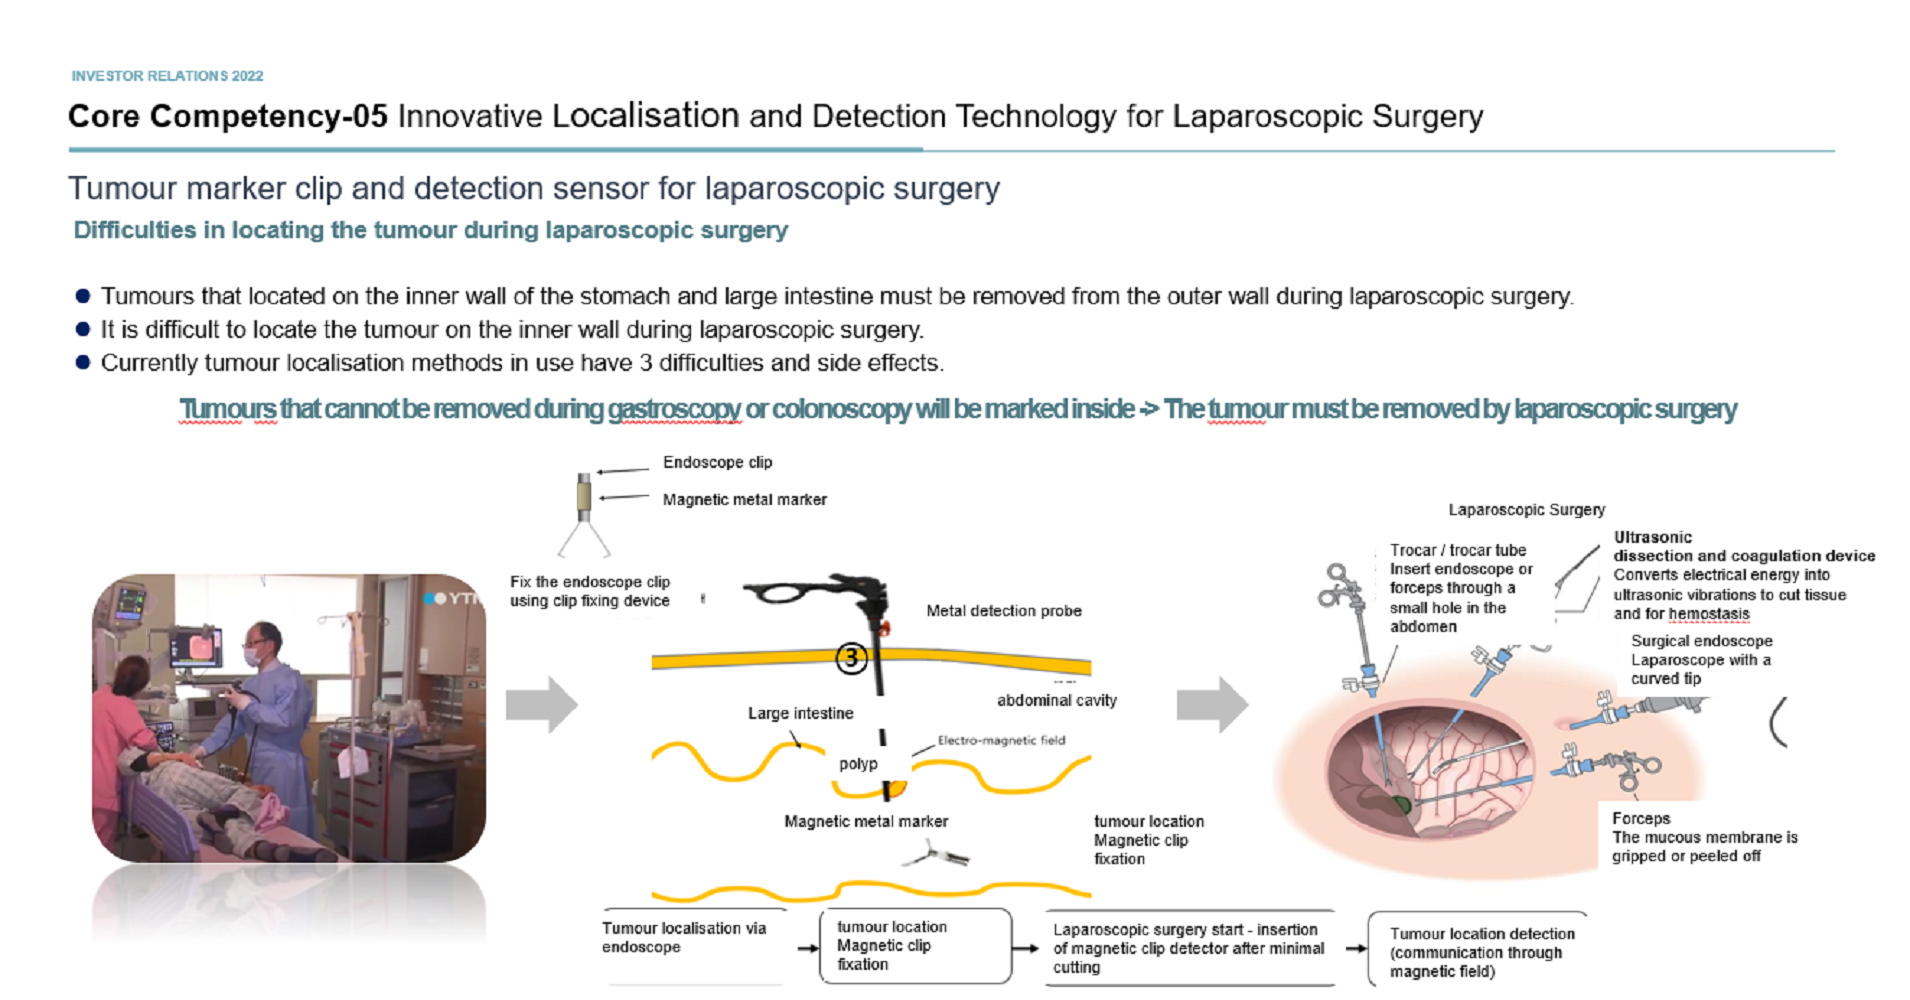 Innovative Localisation and Detection Technology for Laparoscopic Surgery